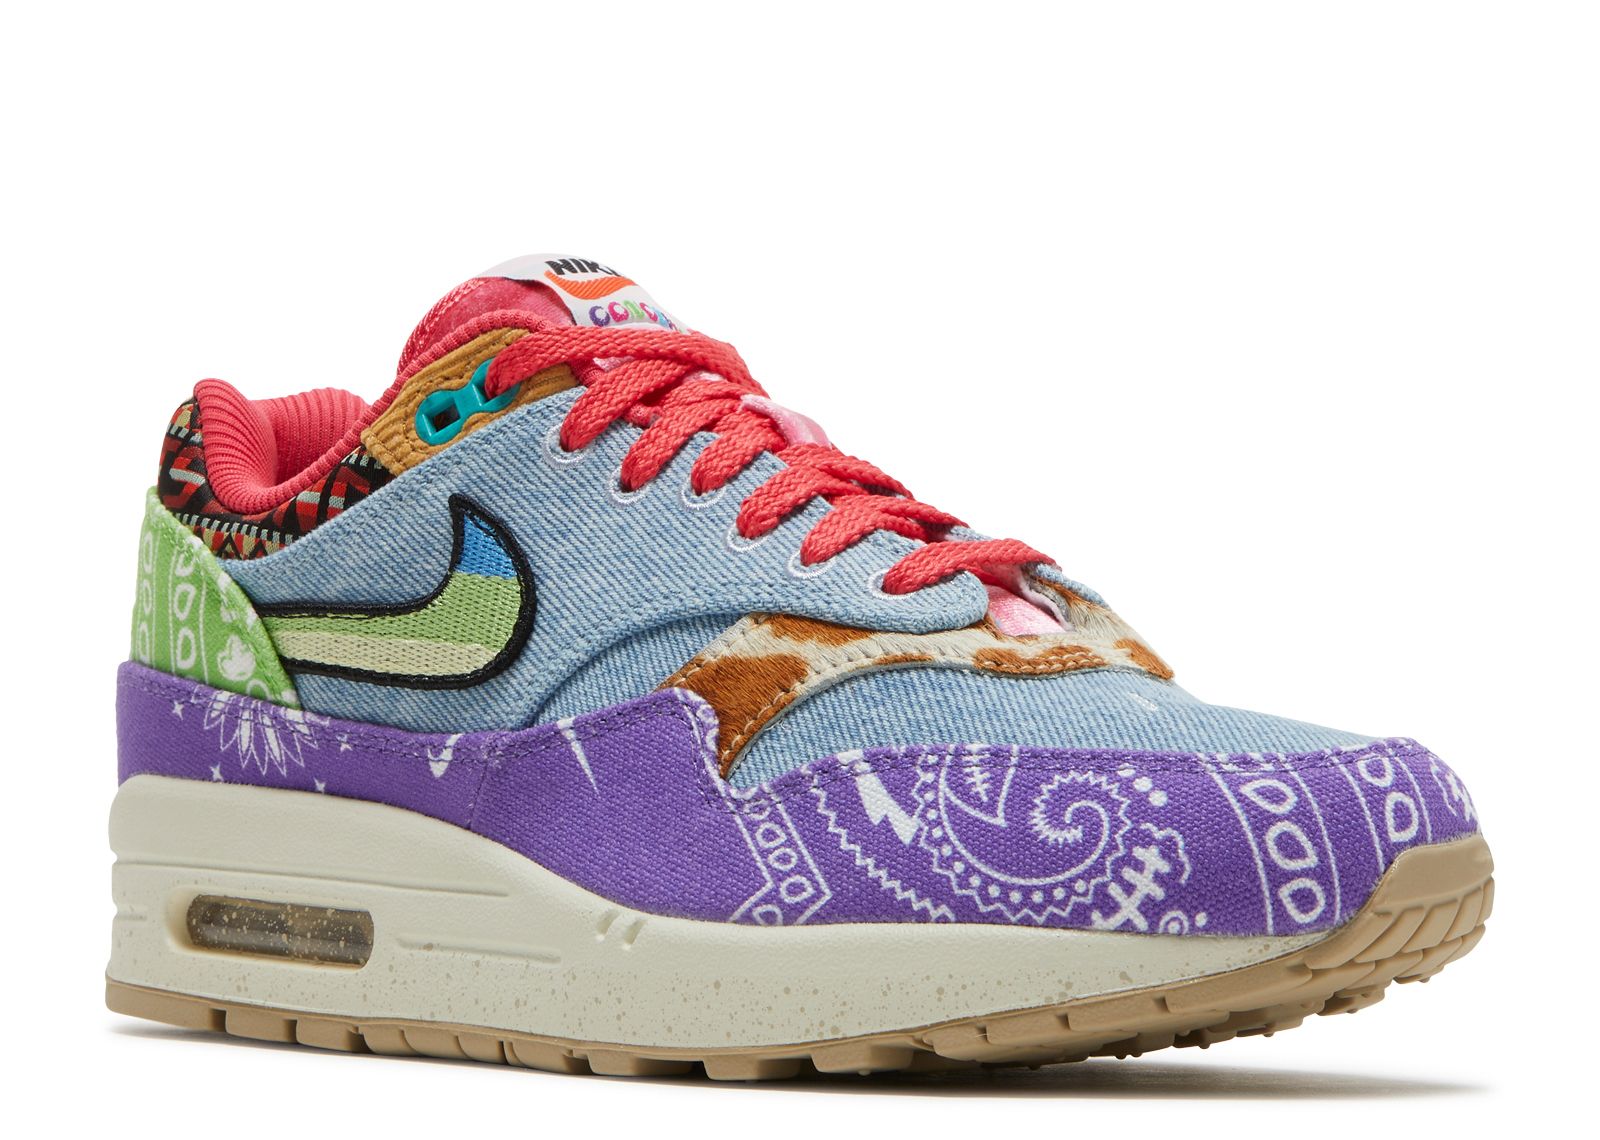 ego Wiskunde tabak Concepts X Air Max 1 SP 'Far Out' - Nike - DN1803 500 -  multi-color/multi-color/sail | Flight Club